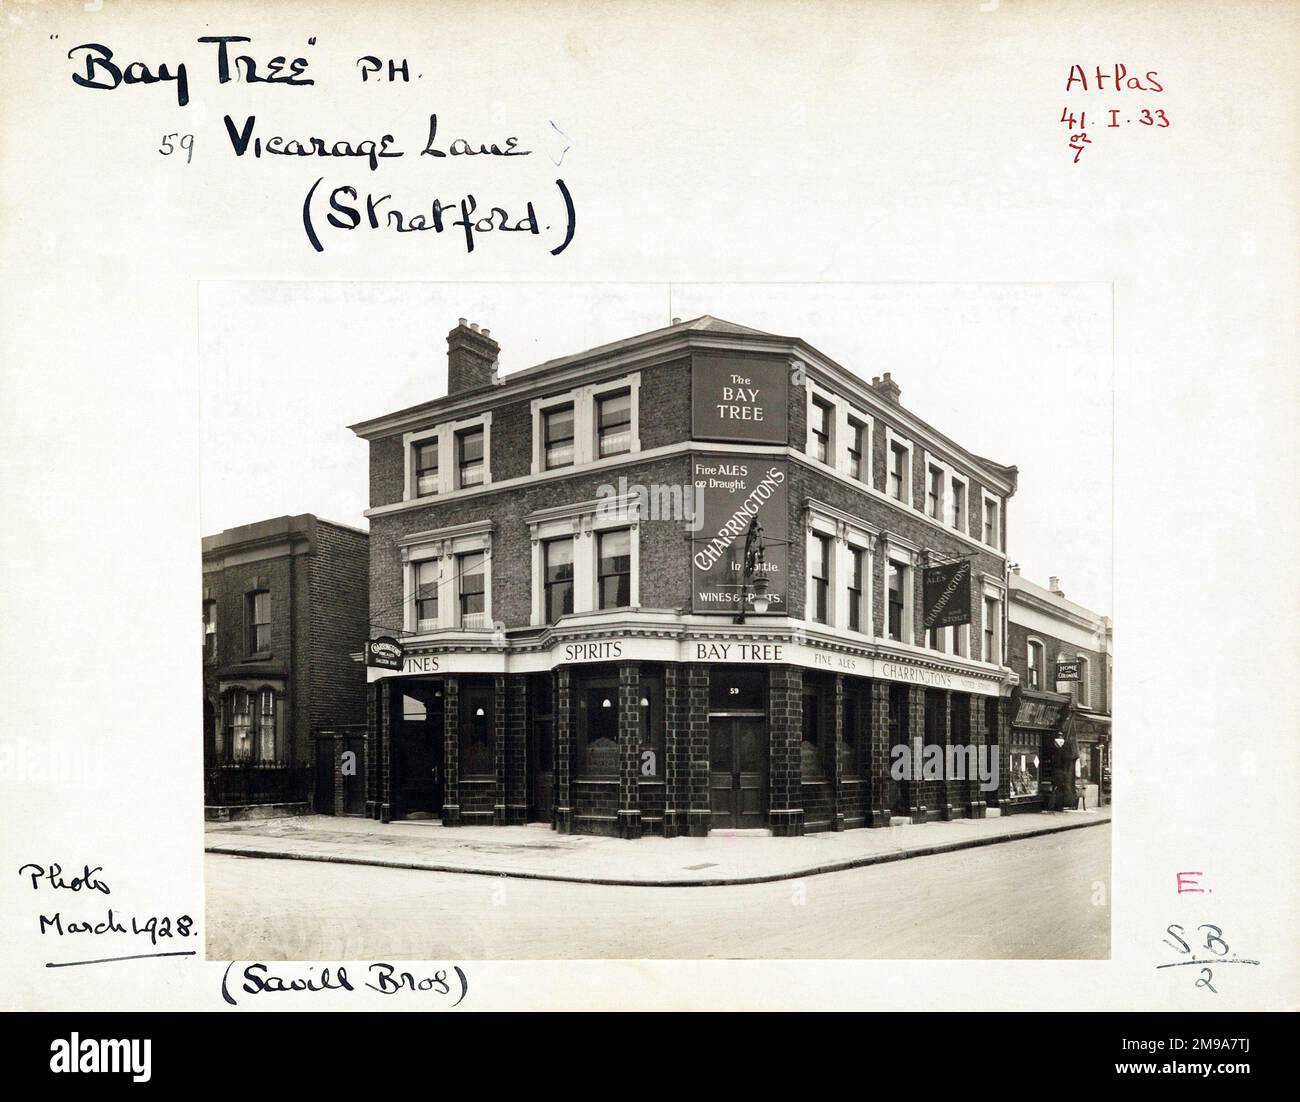 Photograph of Bay Tree PH, Stratford, London. The main side of the print (shown here) depicts: Corner on view of the pub.  The back of the print (available on request) details: Trading Record 1924 . 1961 for the Bay Tree, Stratford, London E15 4HG. As of July 2018 . As of Nov 2013 this is a hotel, which means that the bar is only open to residents. Stock Photo